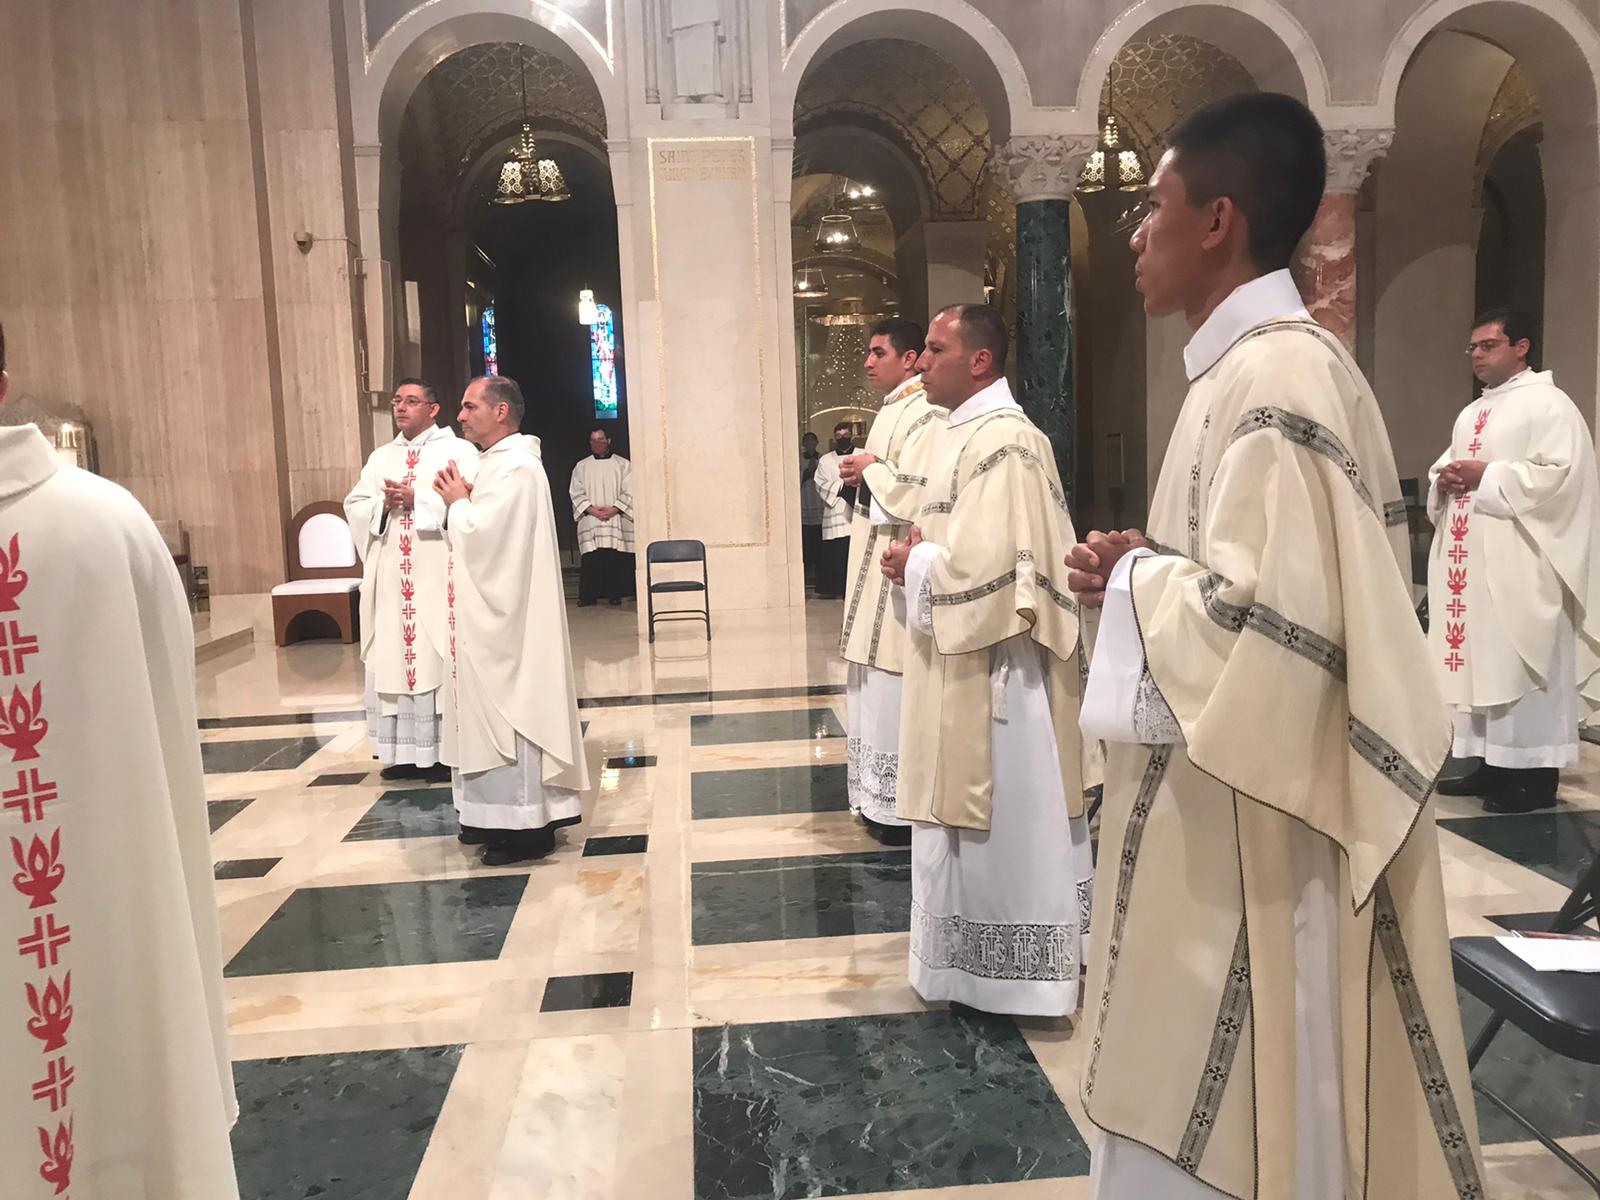 Orditantion to the Diaconate 3 - IVE America